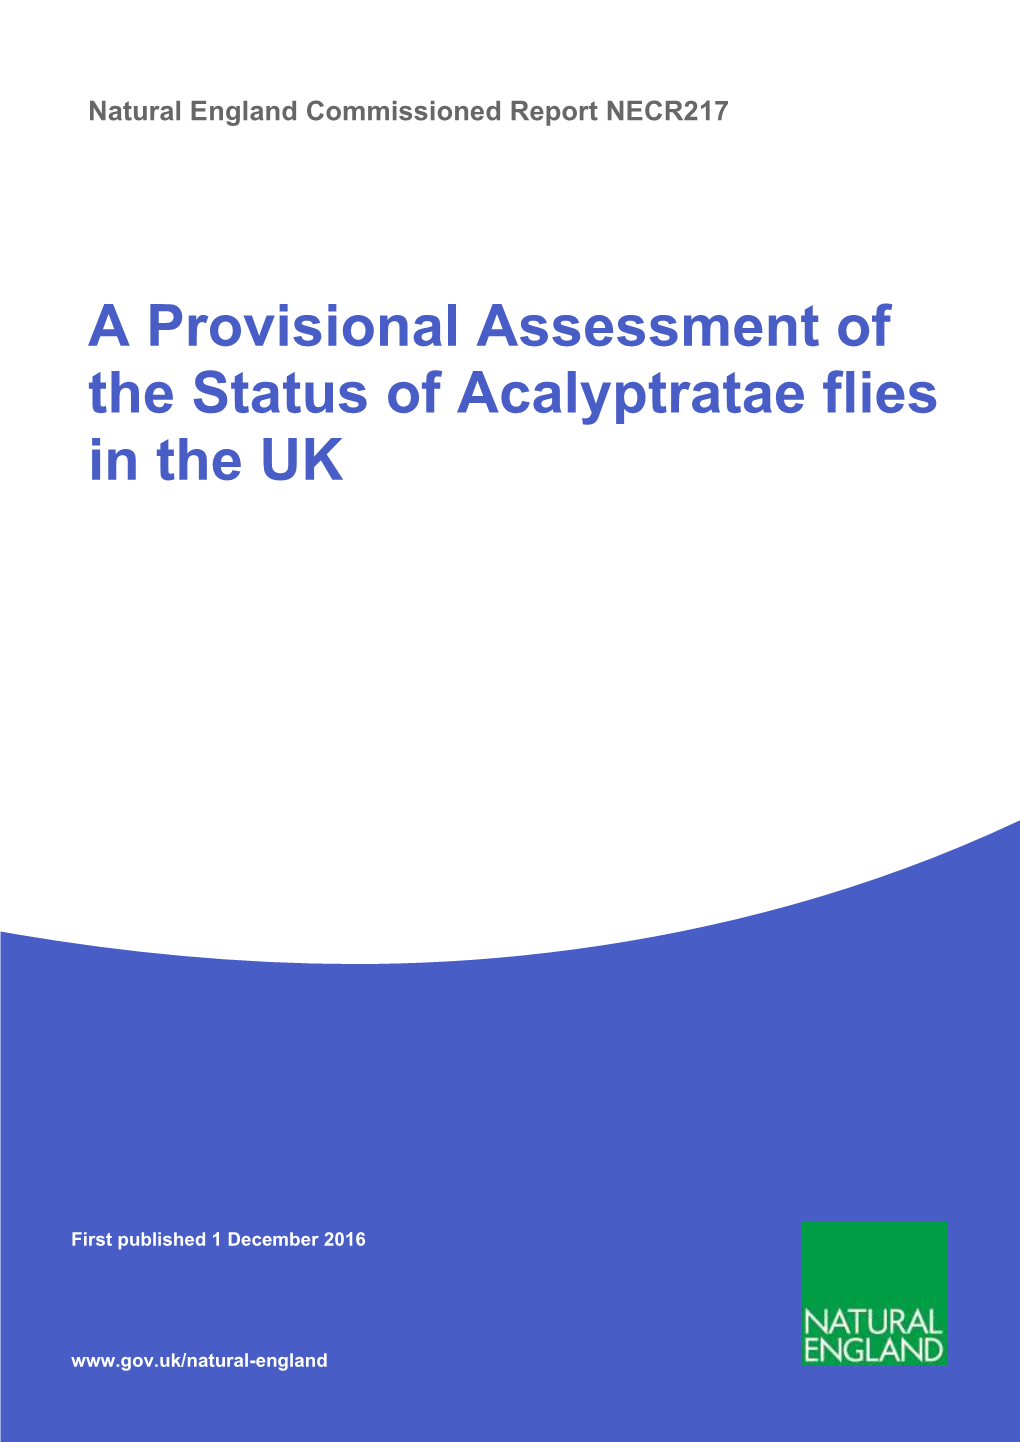 A Provisional Assessment of the Status of Acalyptratae Flies in the UK